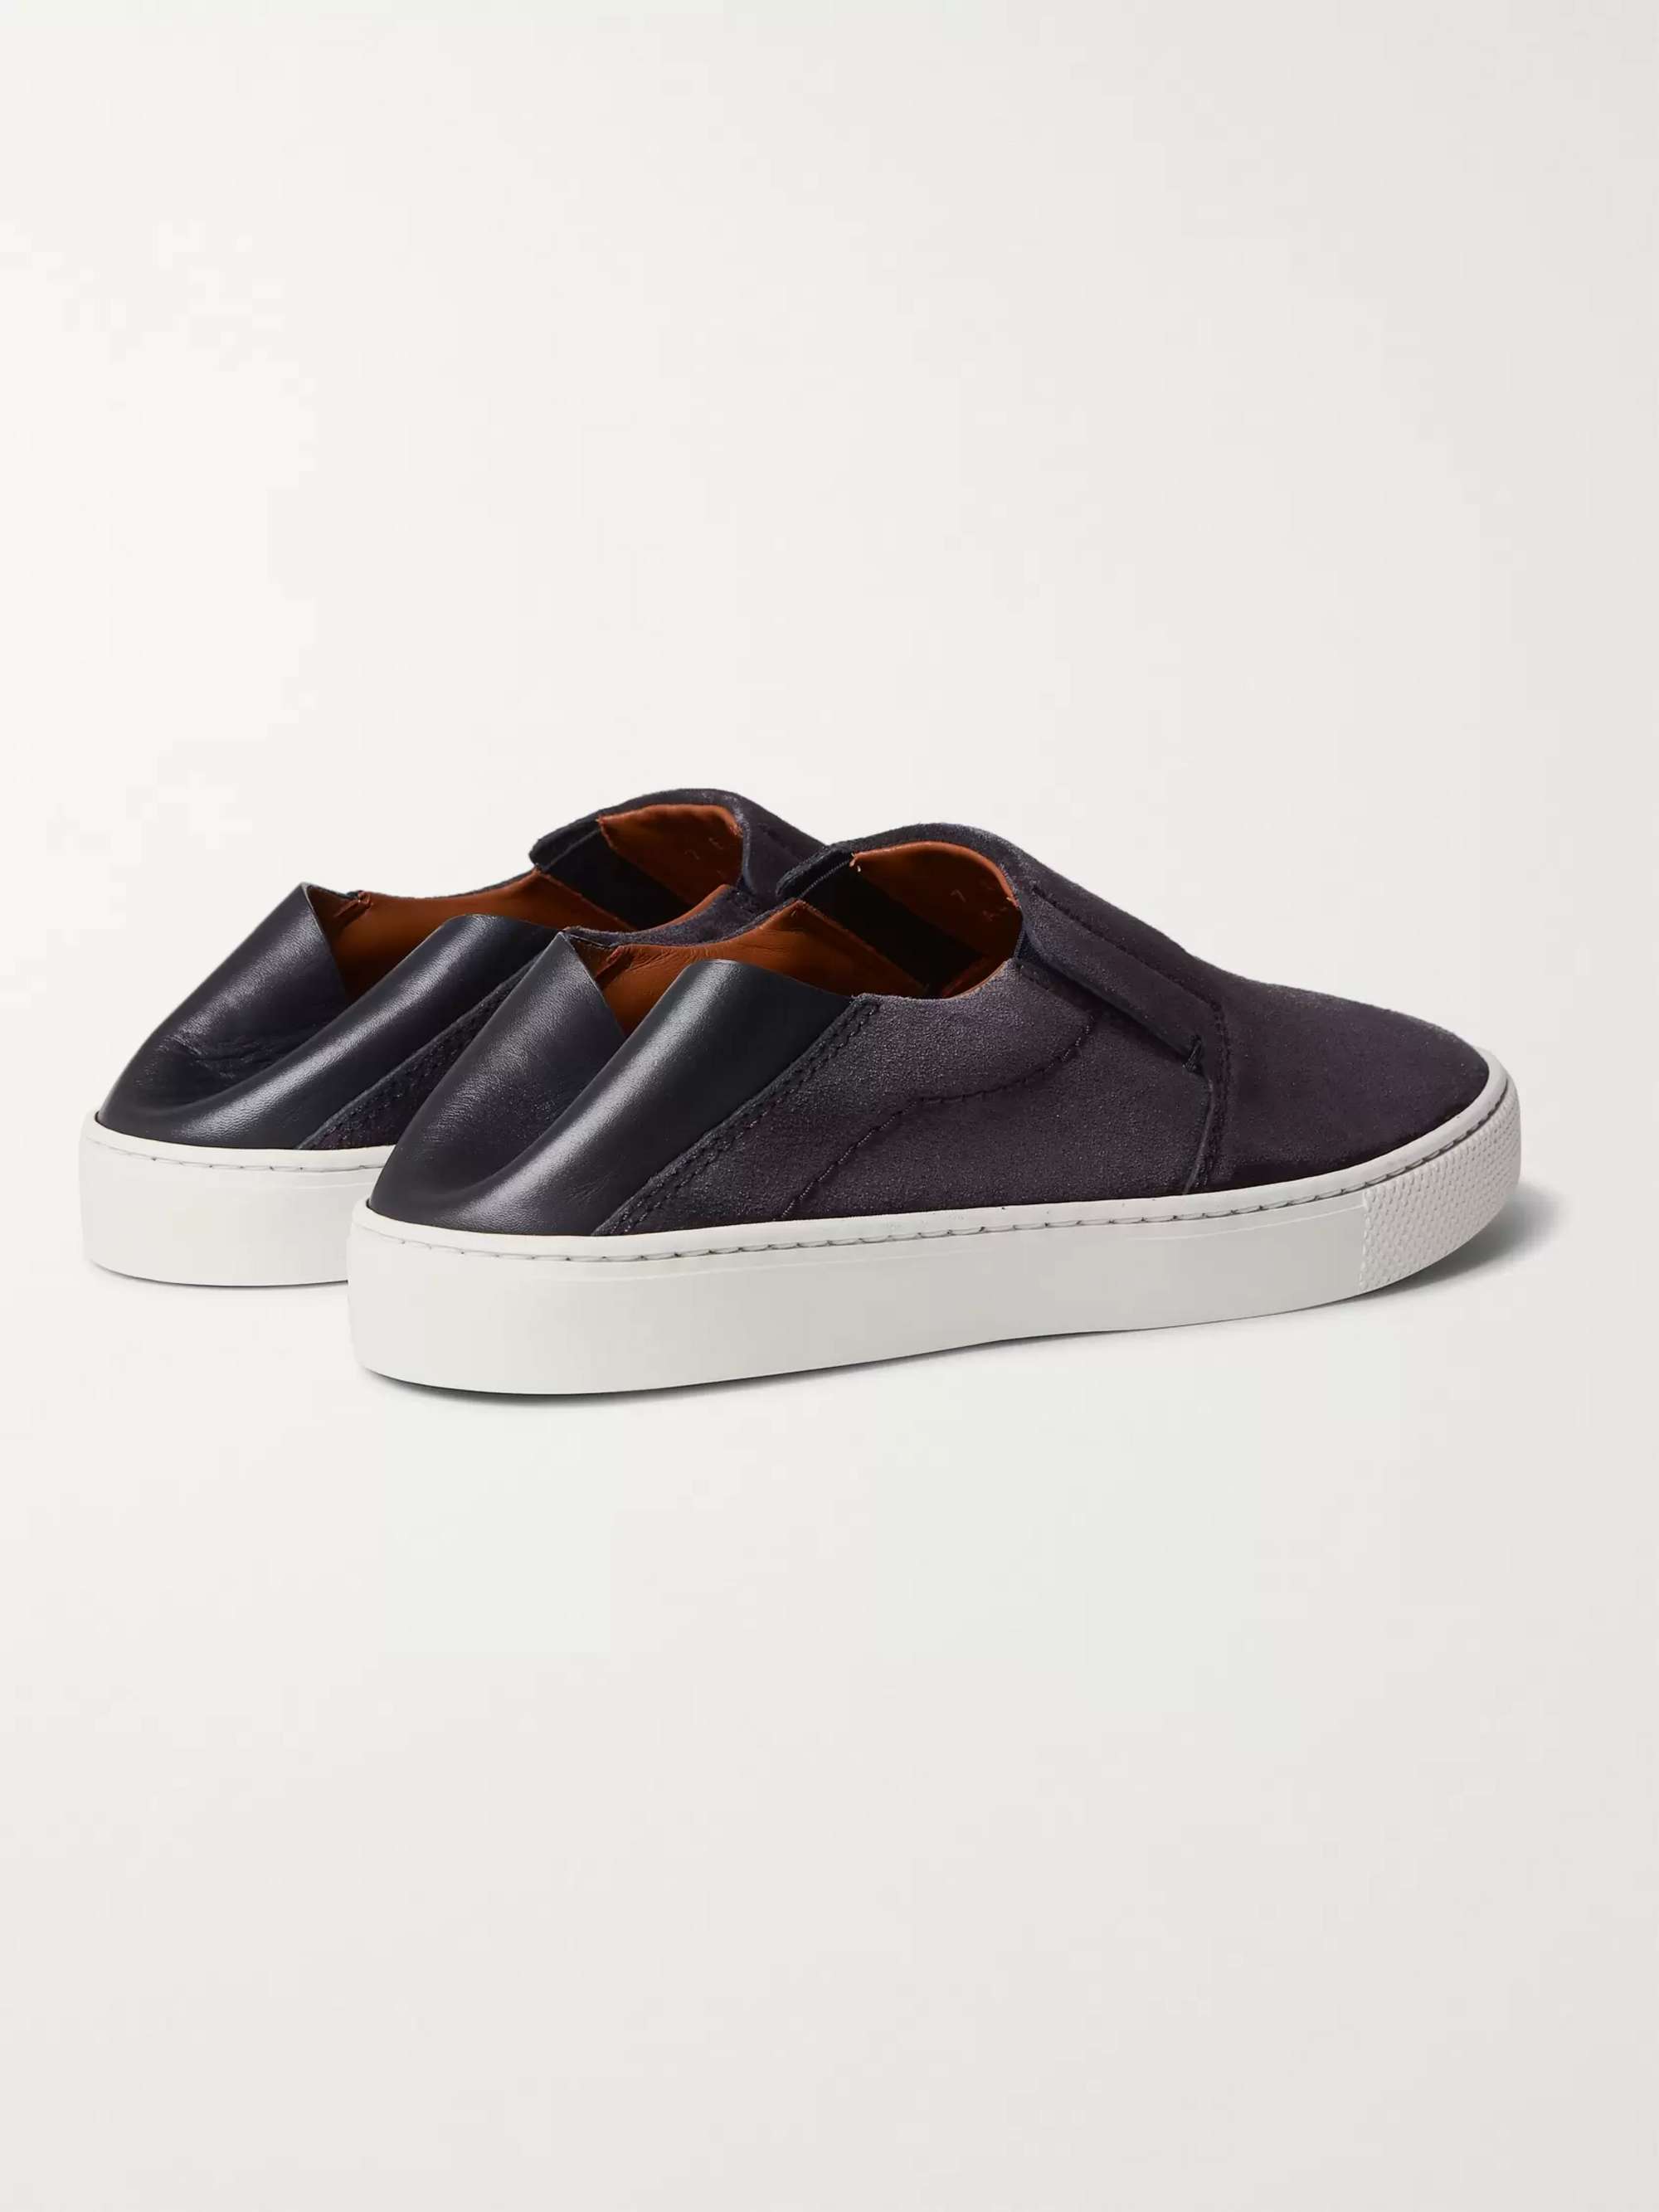 ZEGNA Luigi Collapsible-Heel Suede and Leather Slip-On Sneakers for Men |  MR PORTER